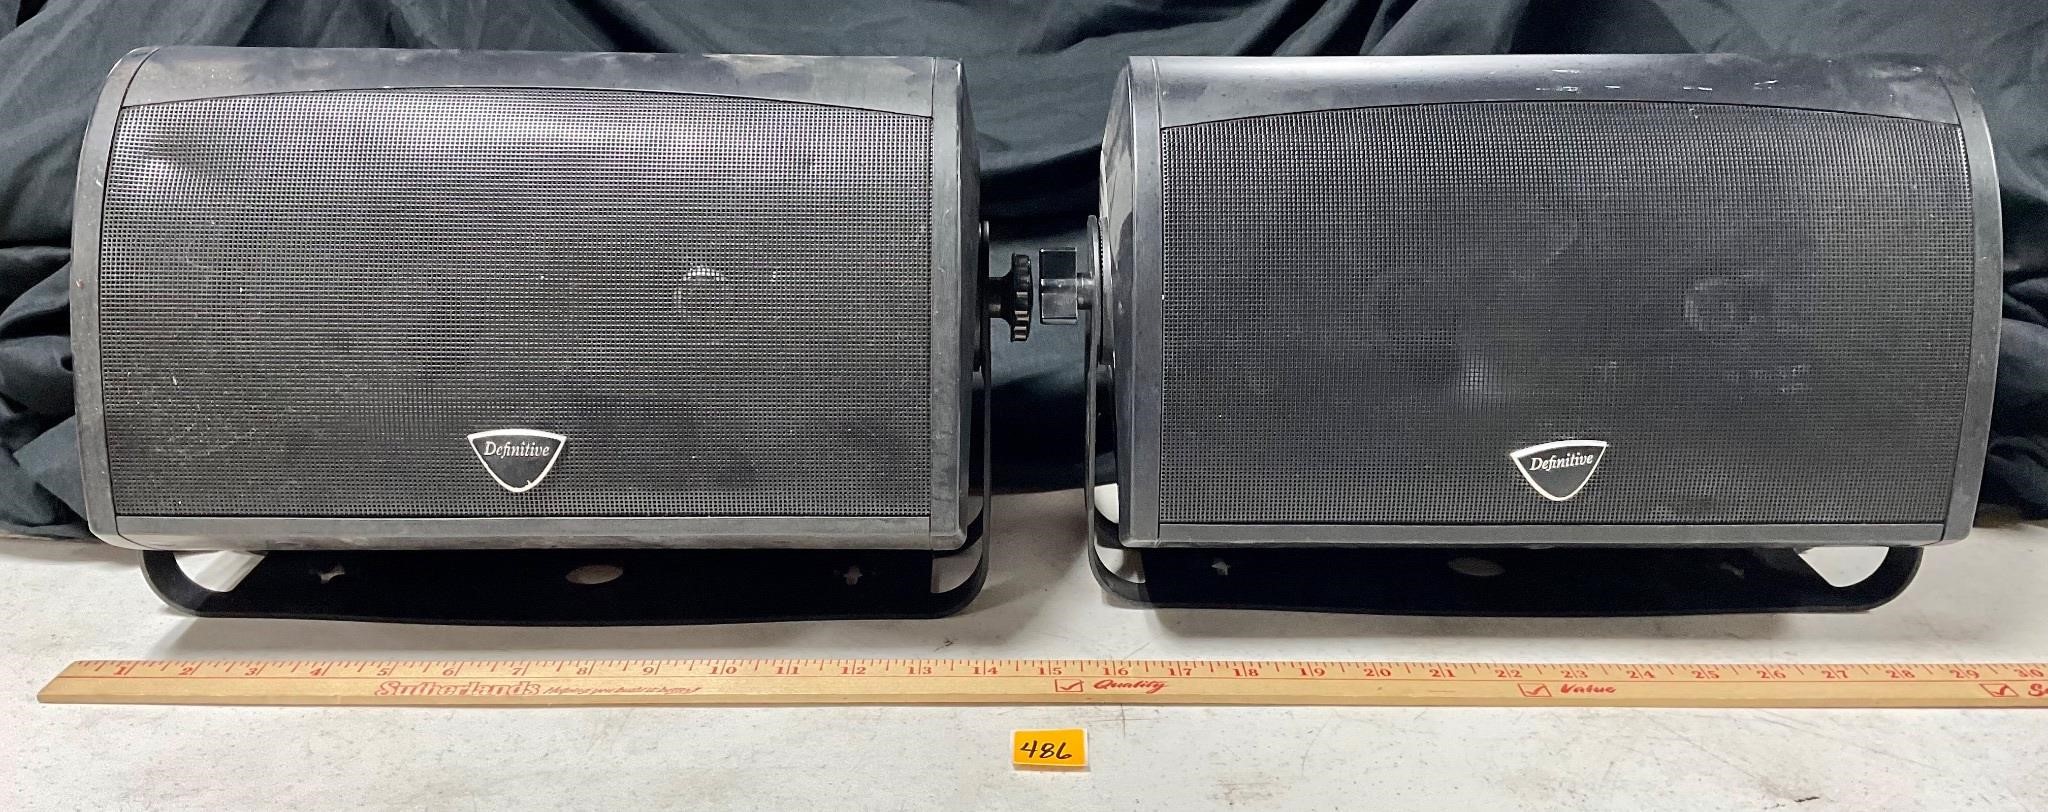 Pair Definitive Speakers AW6500 Outdoor Untested